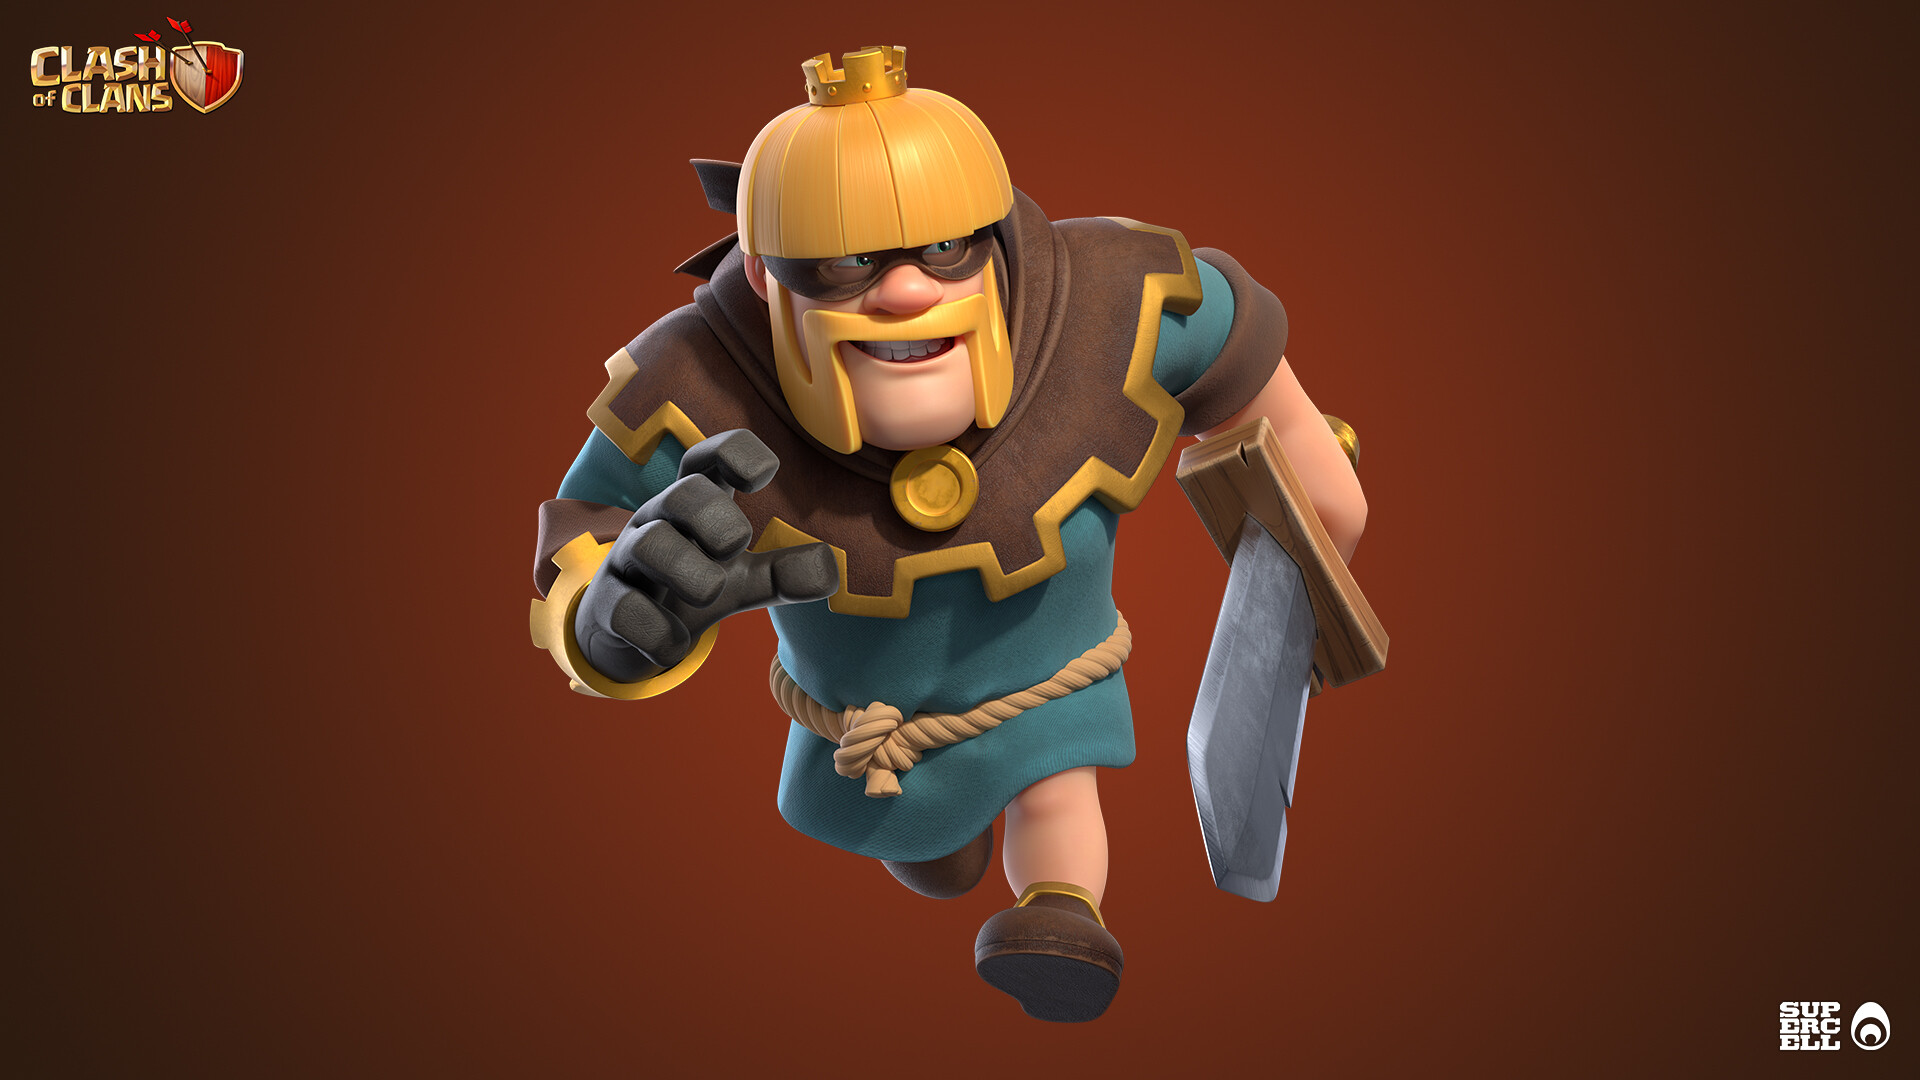 The Tale Of The Rogue King (Clash Of Clans Season Challenges) 